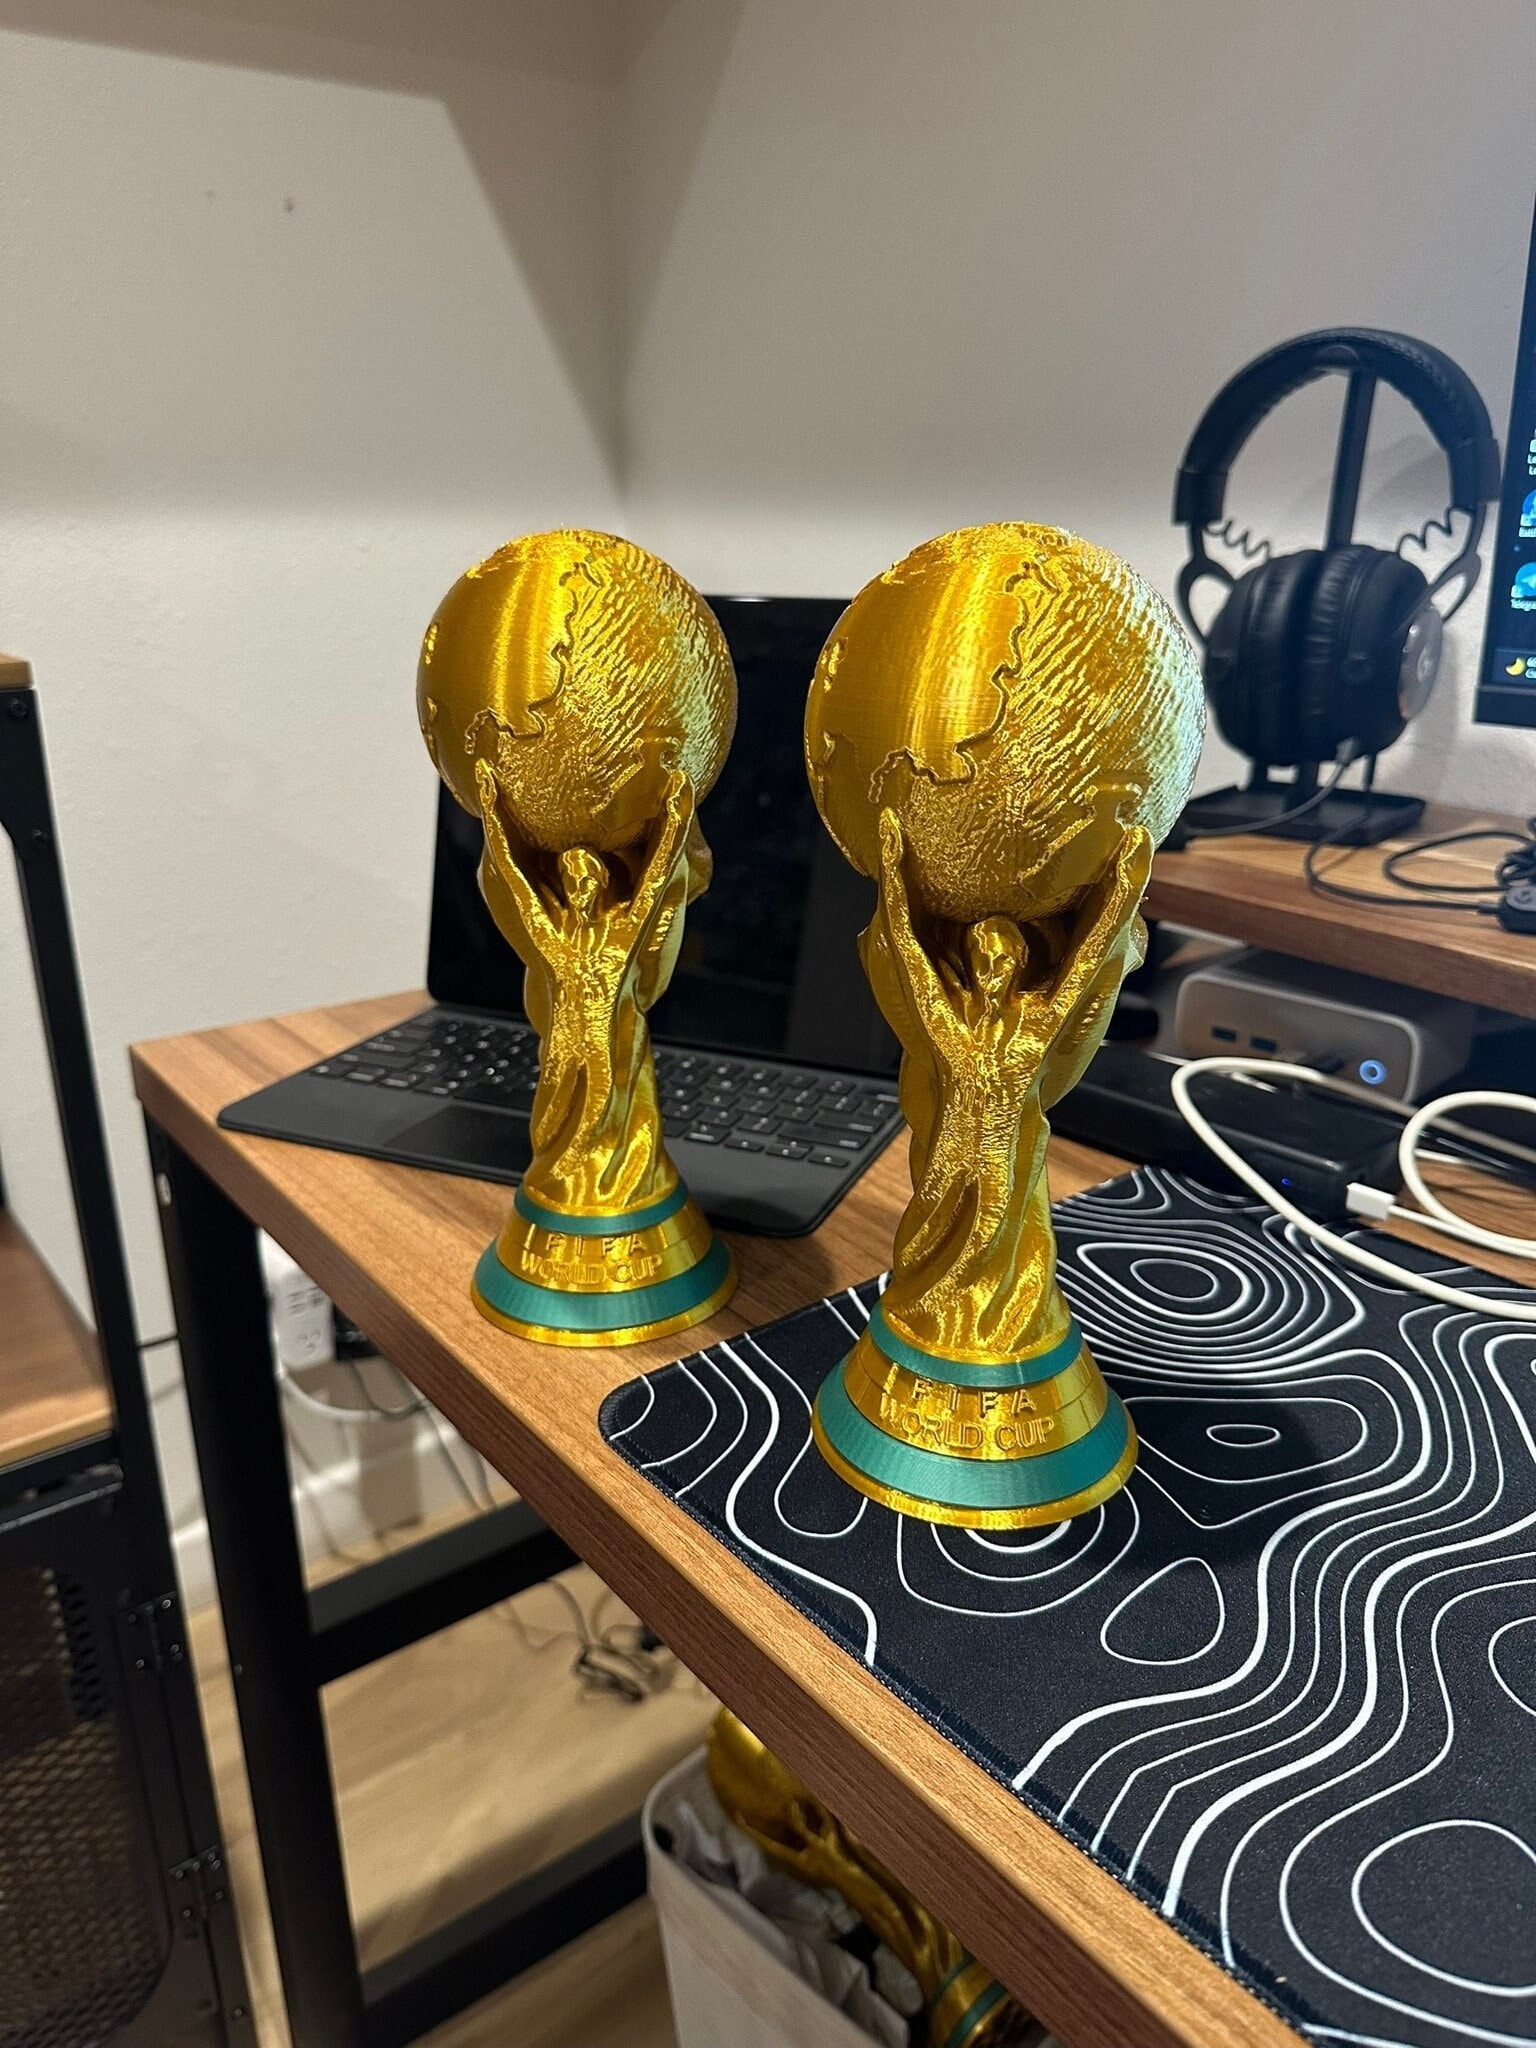  LNGODEHO 2022 World Cup Replica Trophy in Display Case, Resin  Sculpture, Own a World Soccer's Biggest Prize (10.6 inch) : Sports &  Outdoors